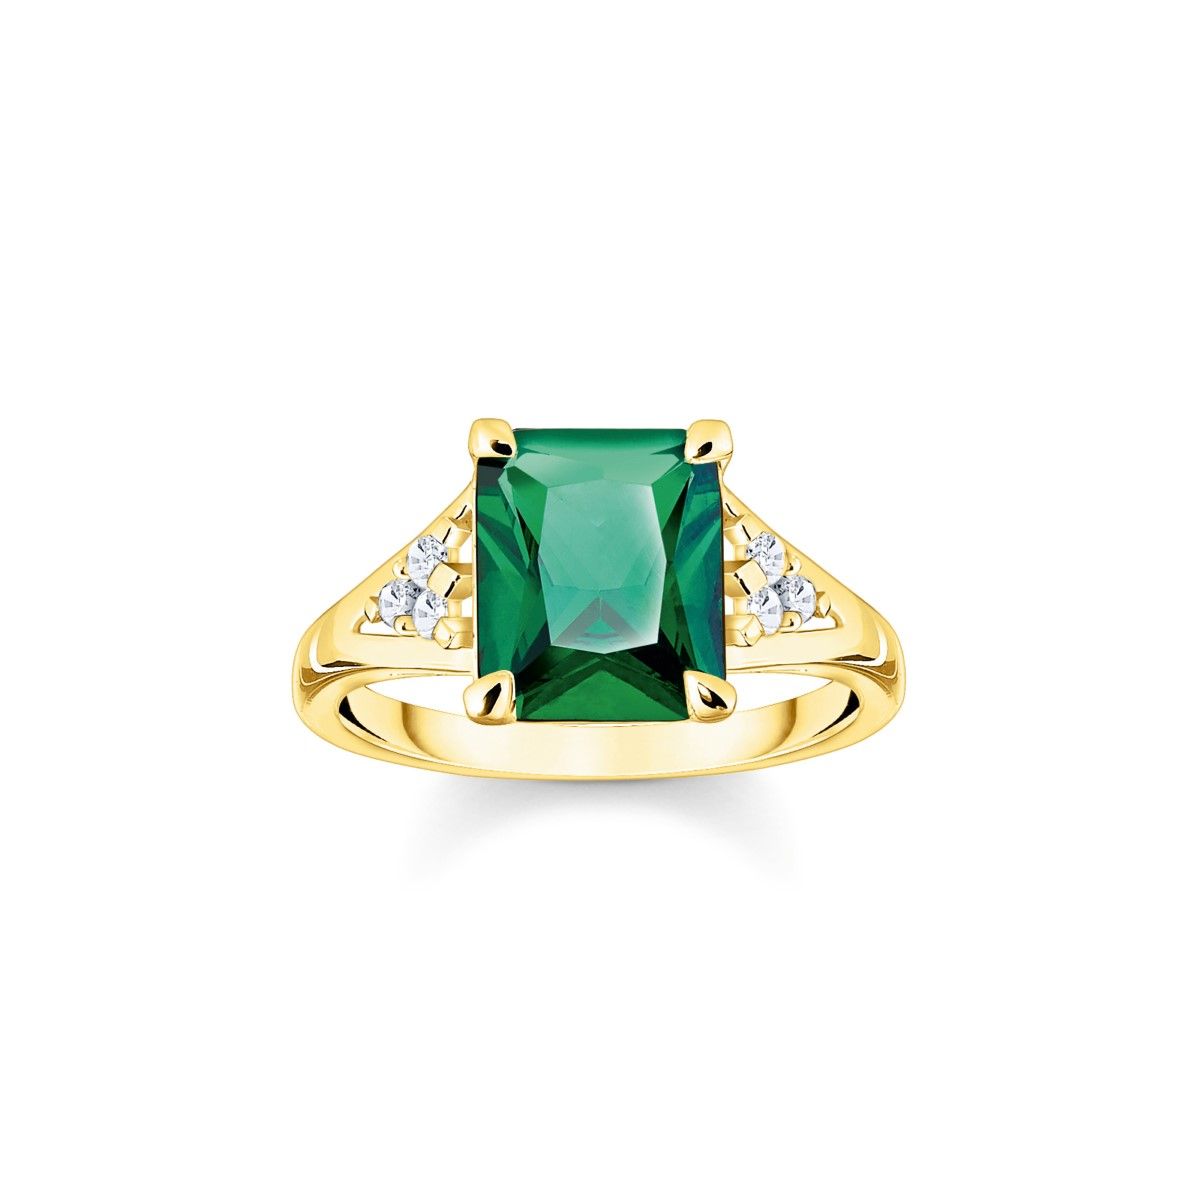 Which is the best website to buy emerald jewelry online in the USA? - Quora